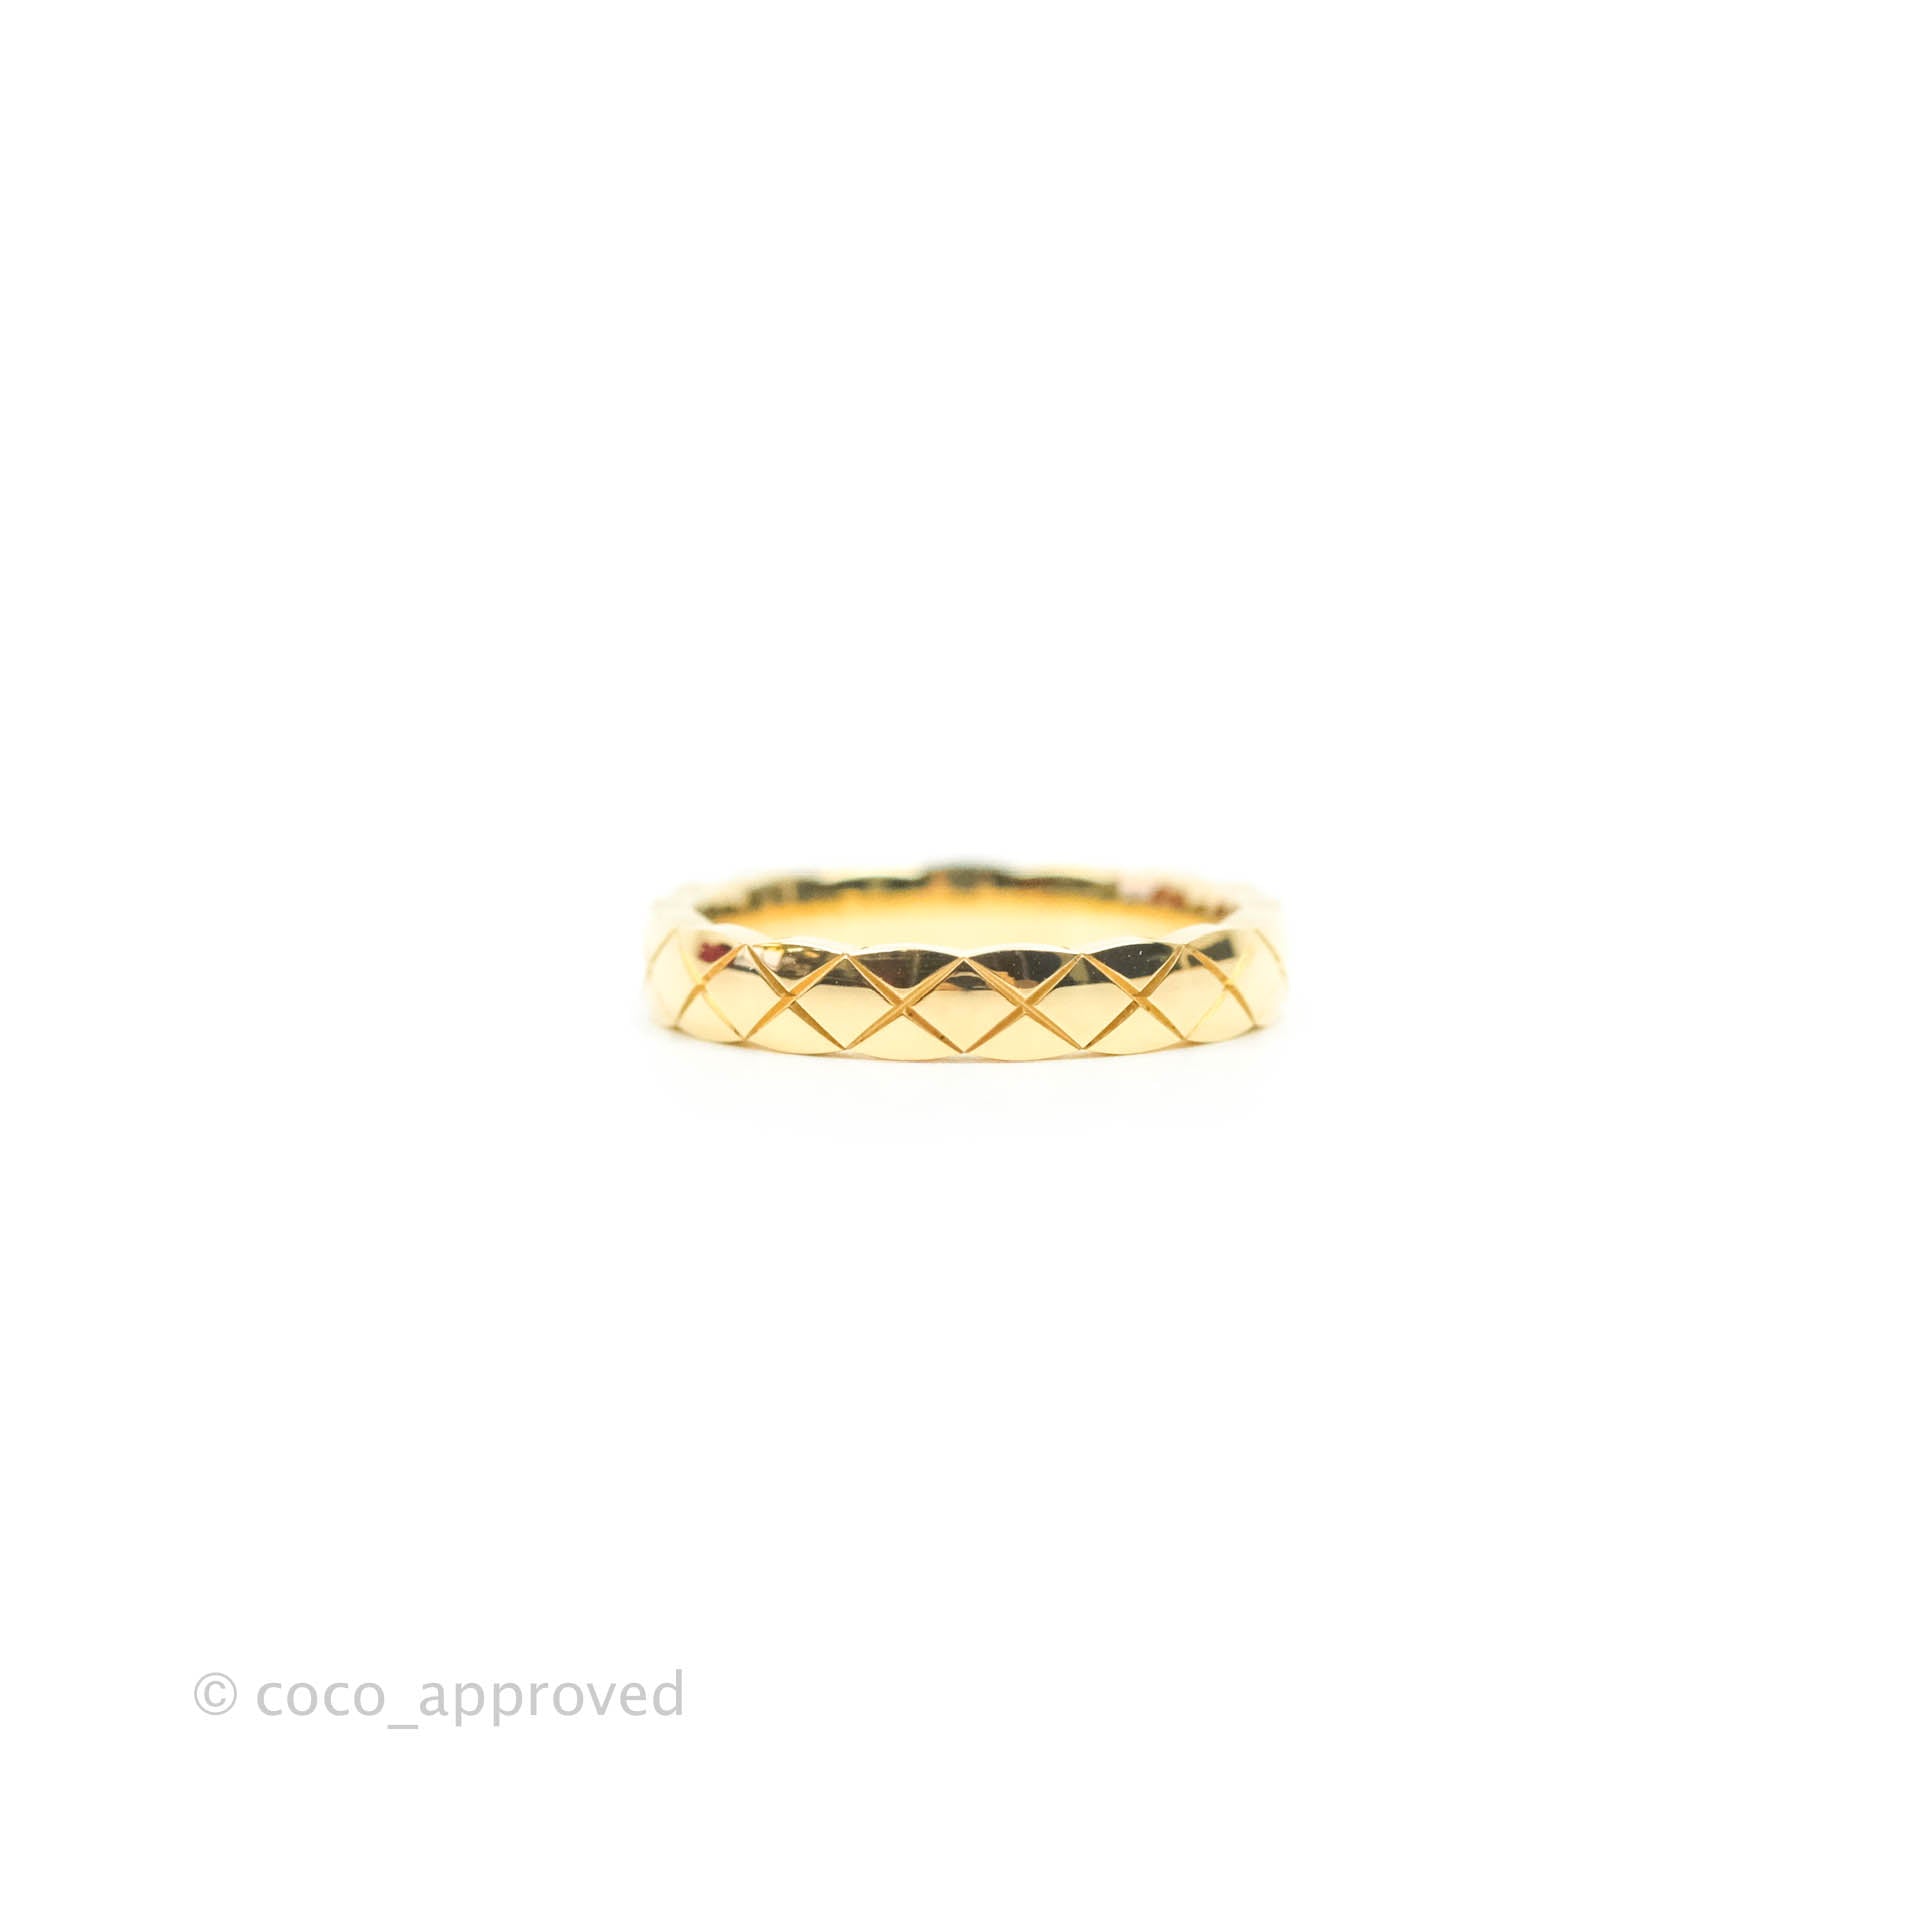 Chanel Coco Crush Mini Ring 18K Yellow Gold Size 48 – Coco Approved Studio